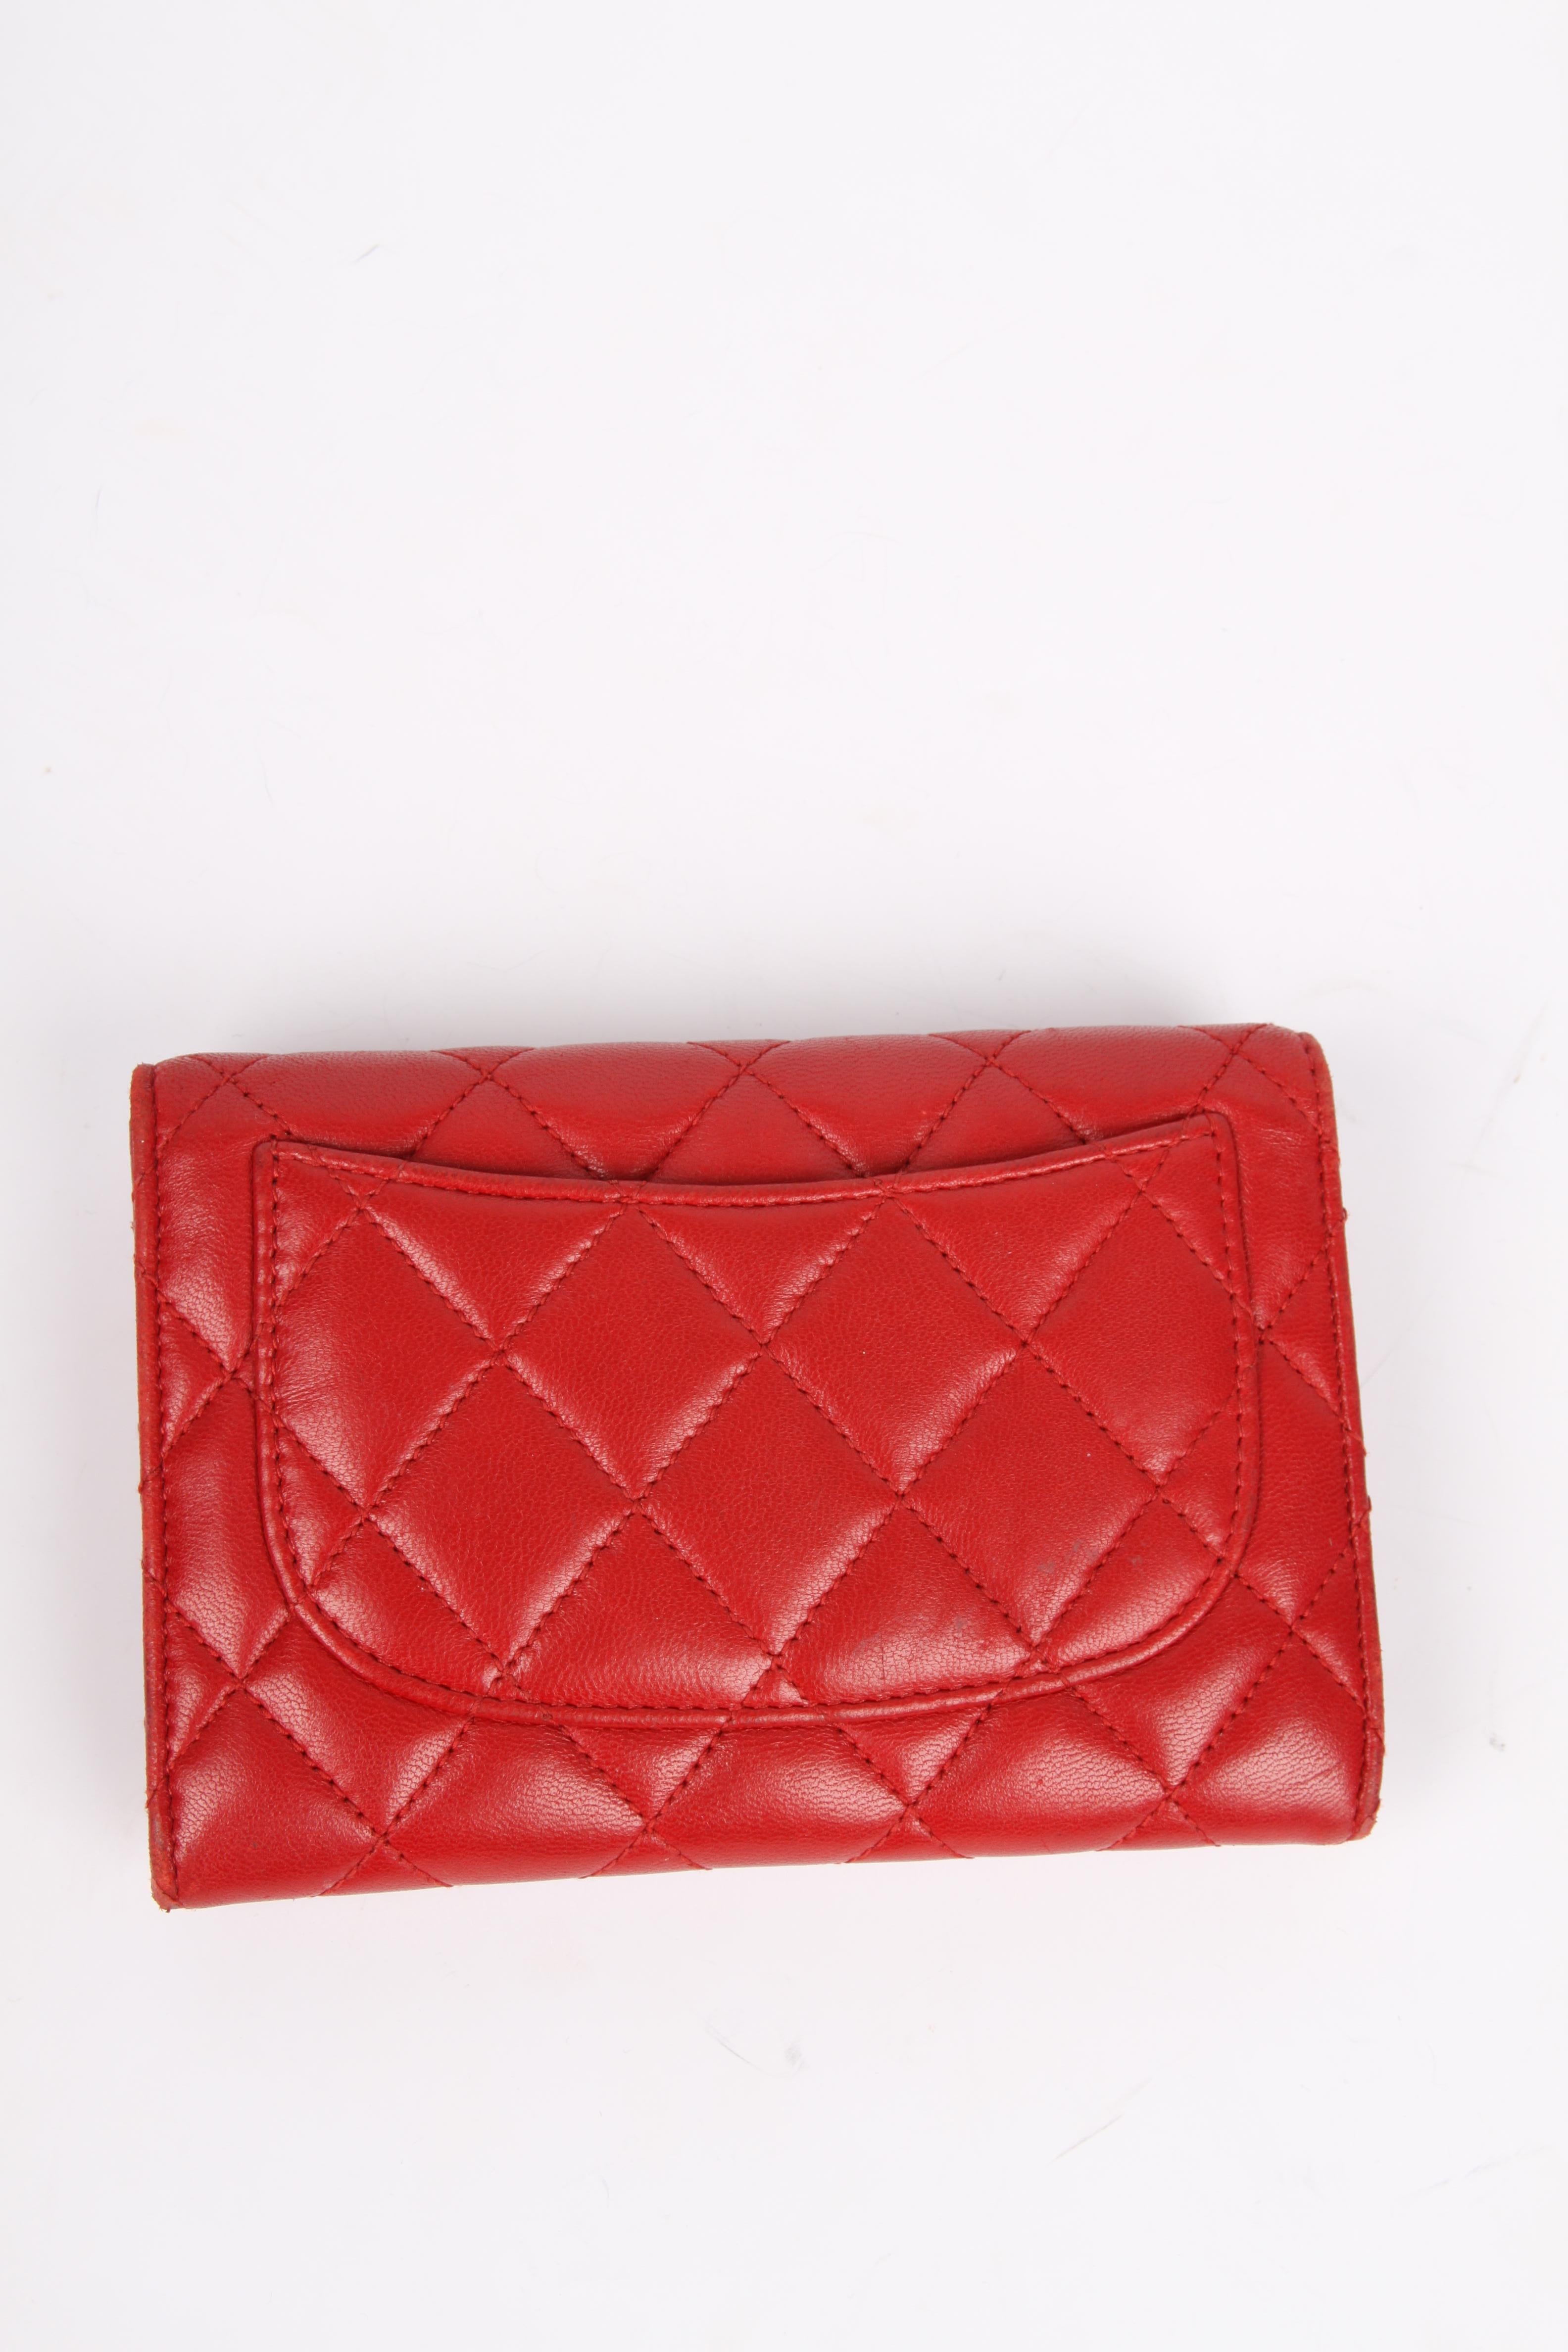 Chanel Quilted Wallet - red leather In Good Condition For Sale In Baarn, NL